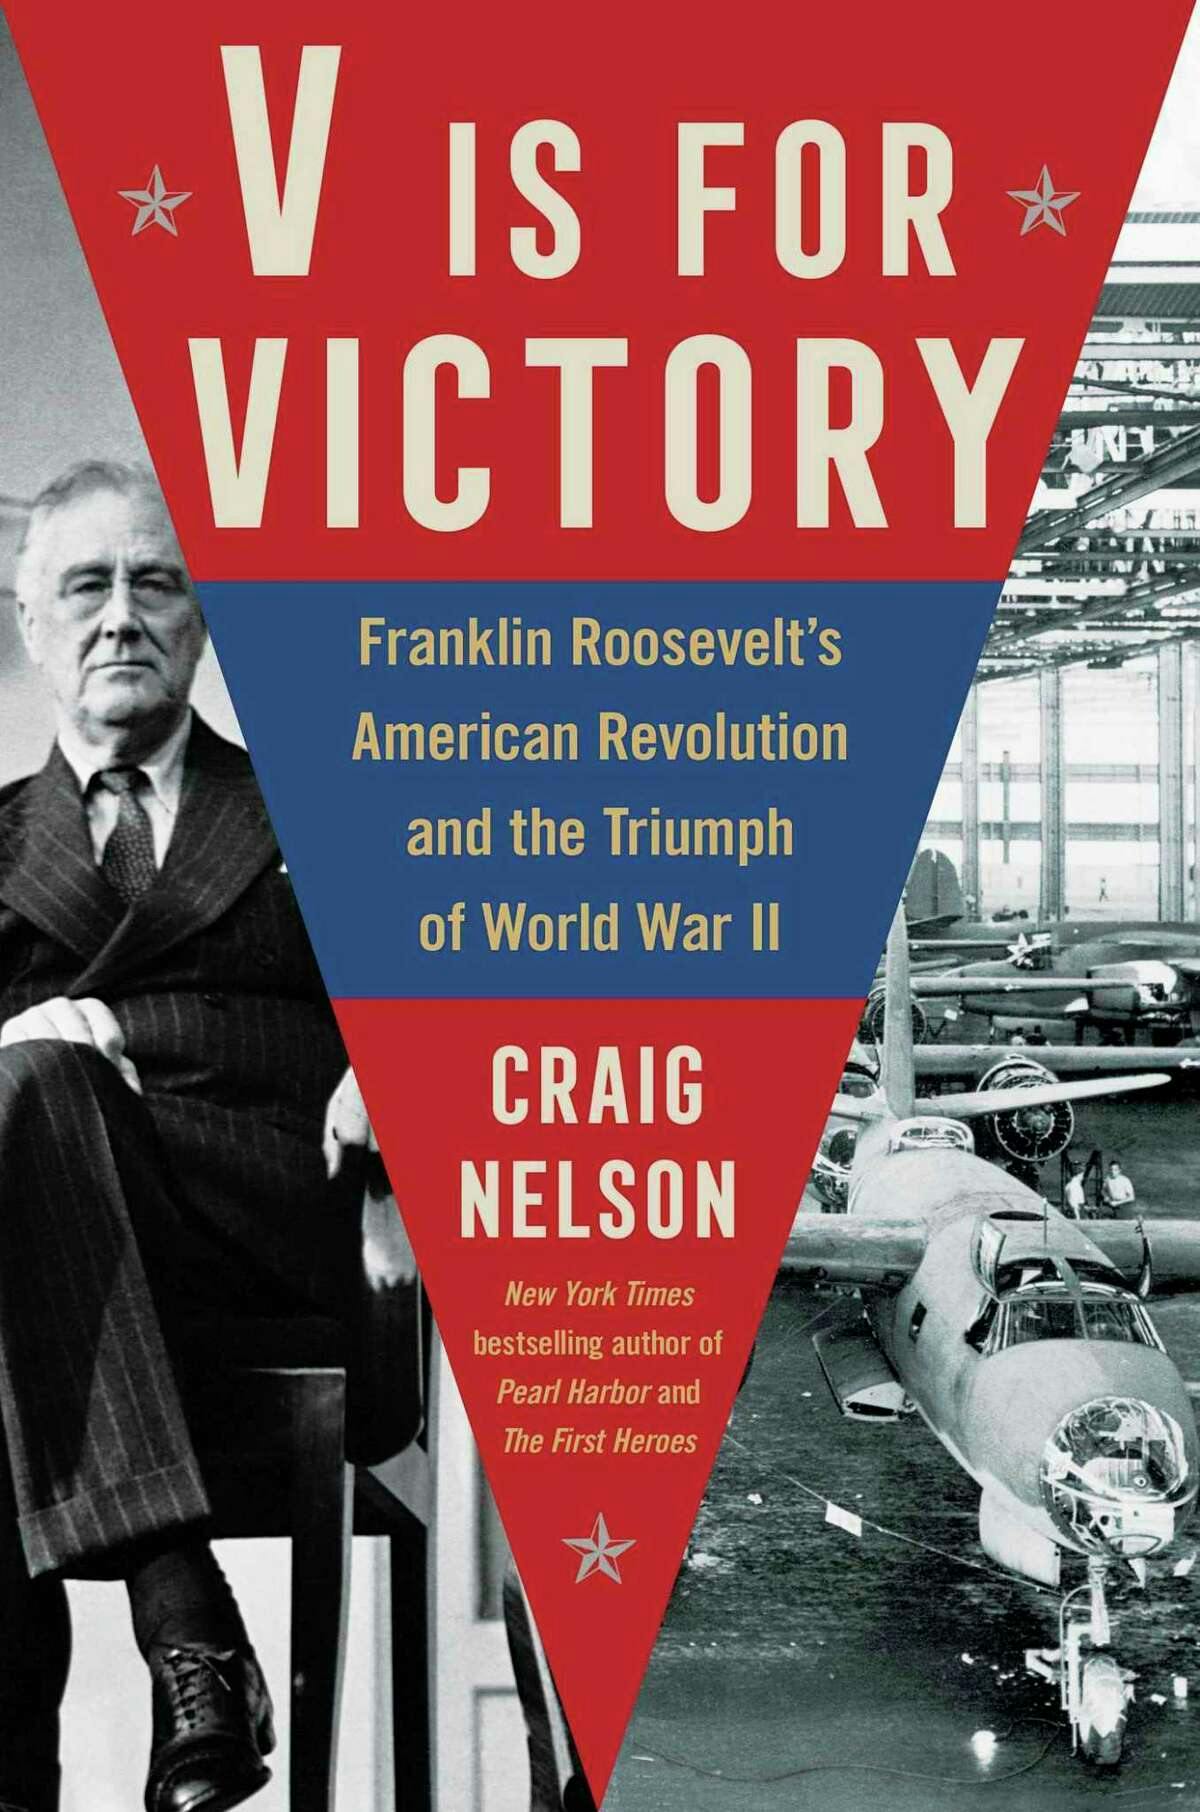 Episode 417-Interview w/ Craig Nelson about his book V is For Victory